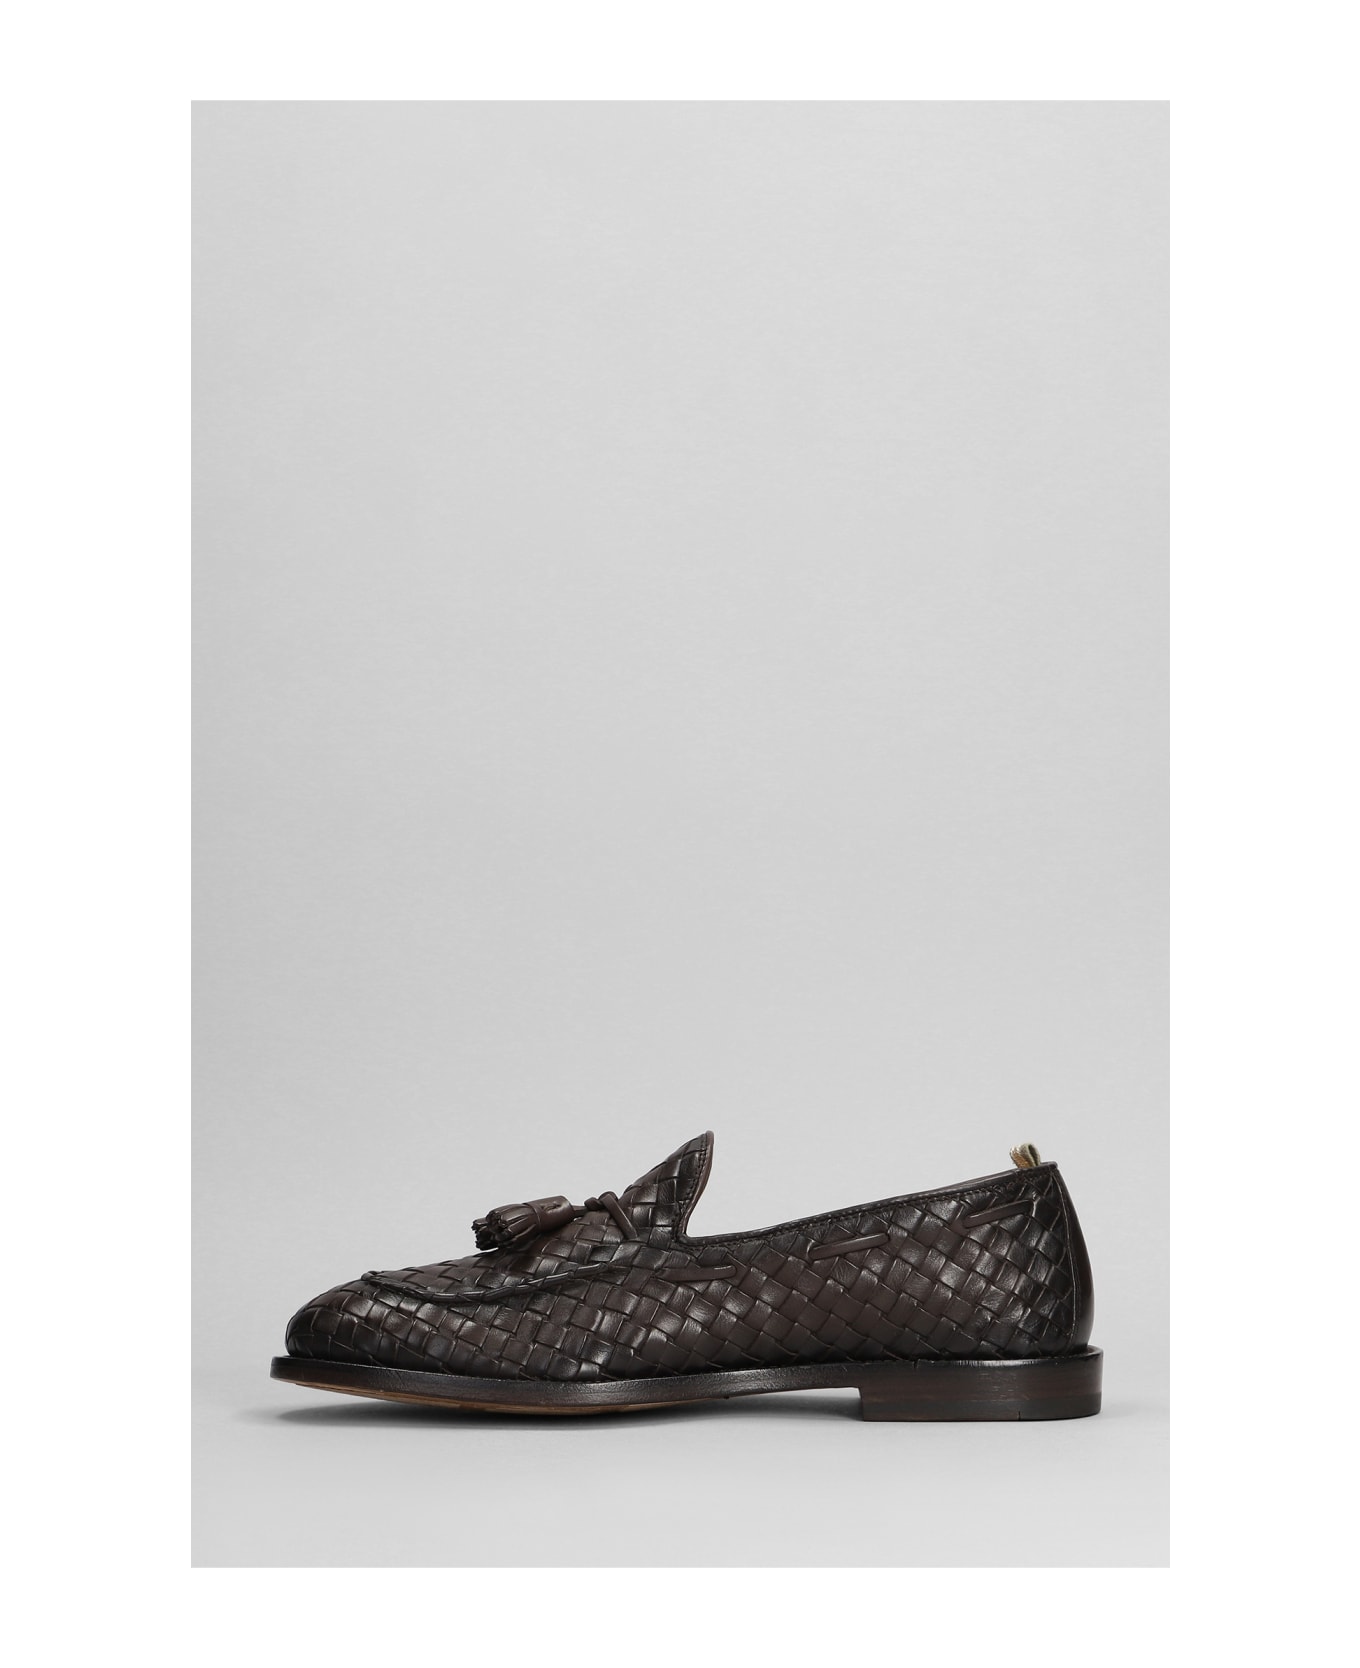 Officine Creative Opera 004 Loafers In Brown Leather - brown